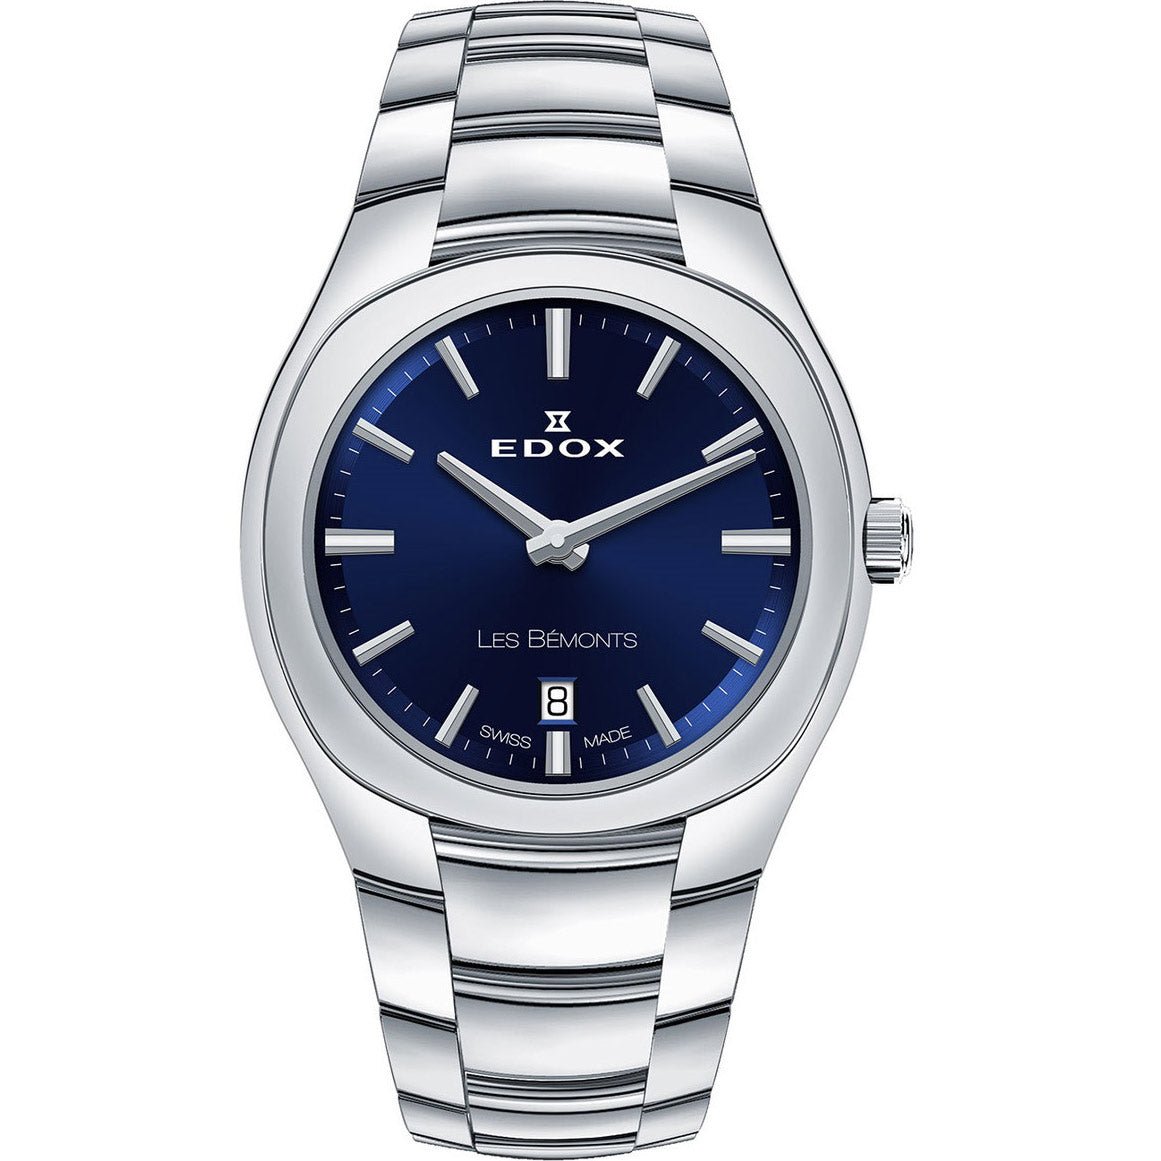 Edox - Les Bémonts Date - Watch